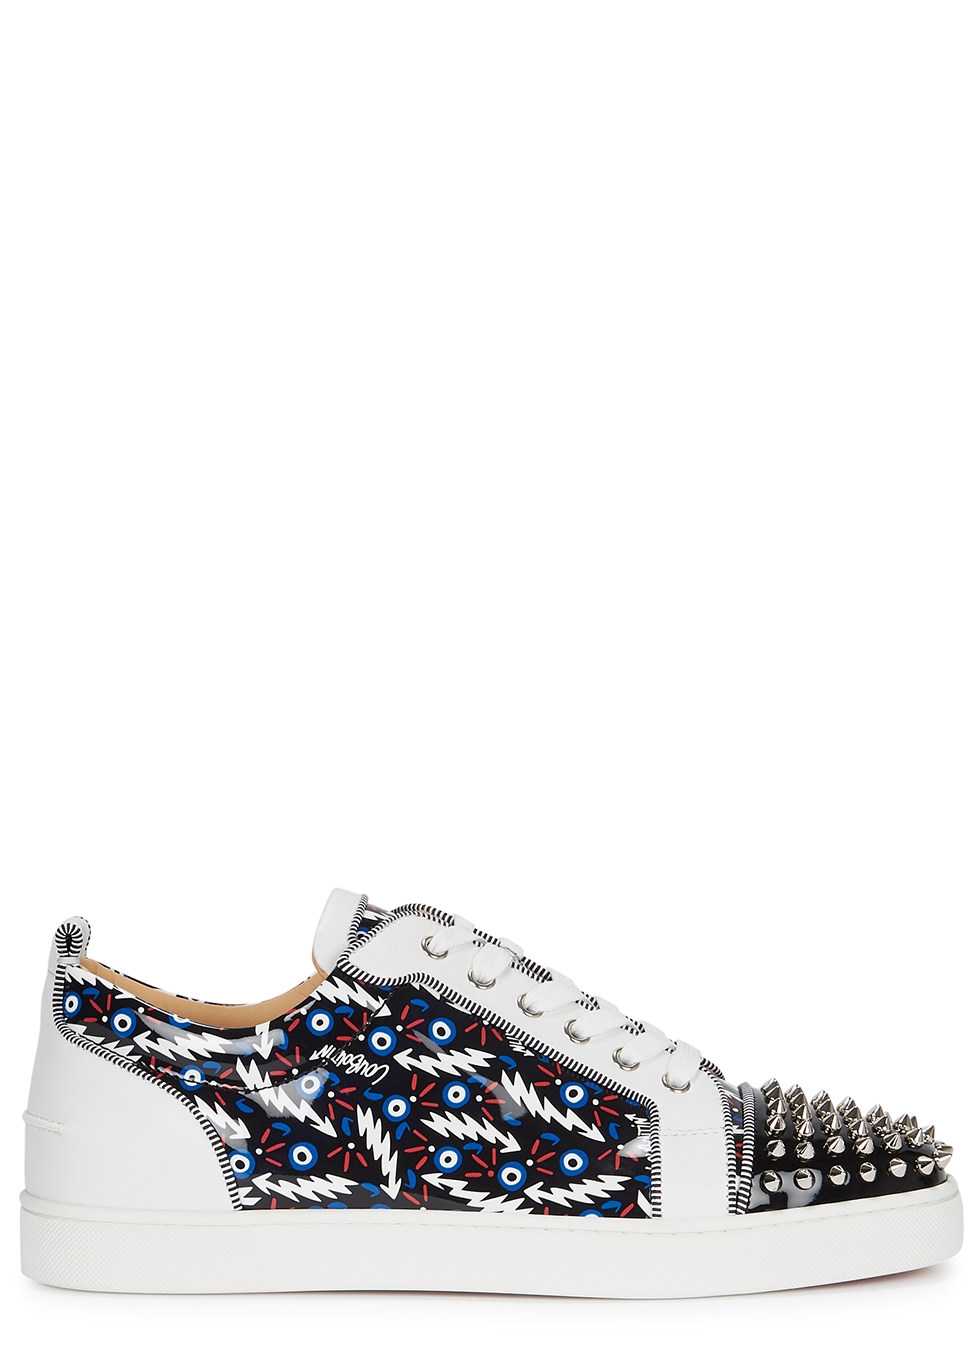 sneakers with spikes on them